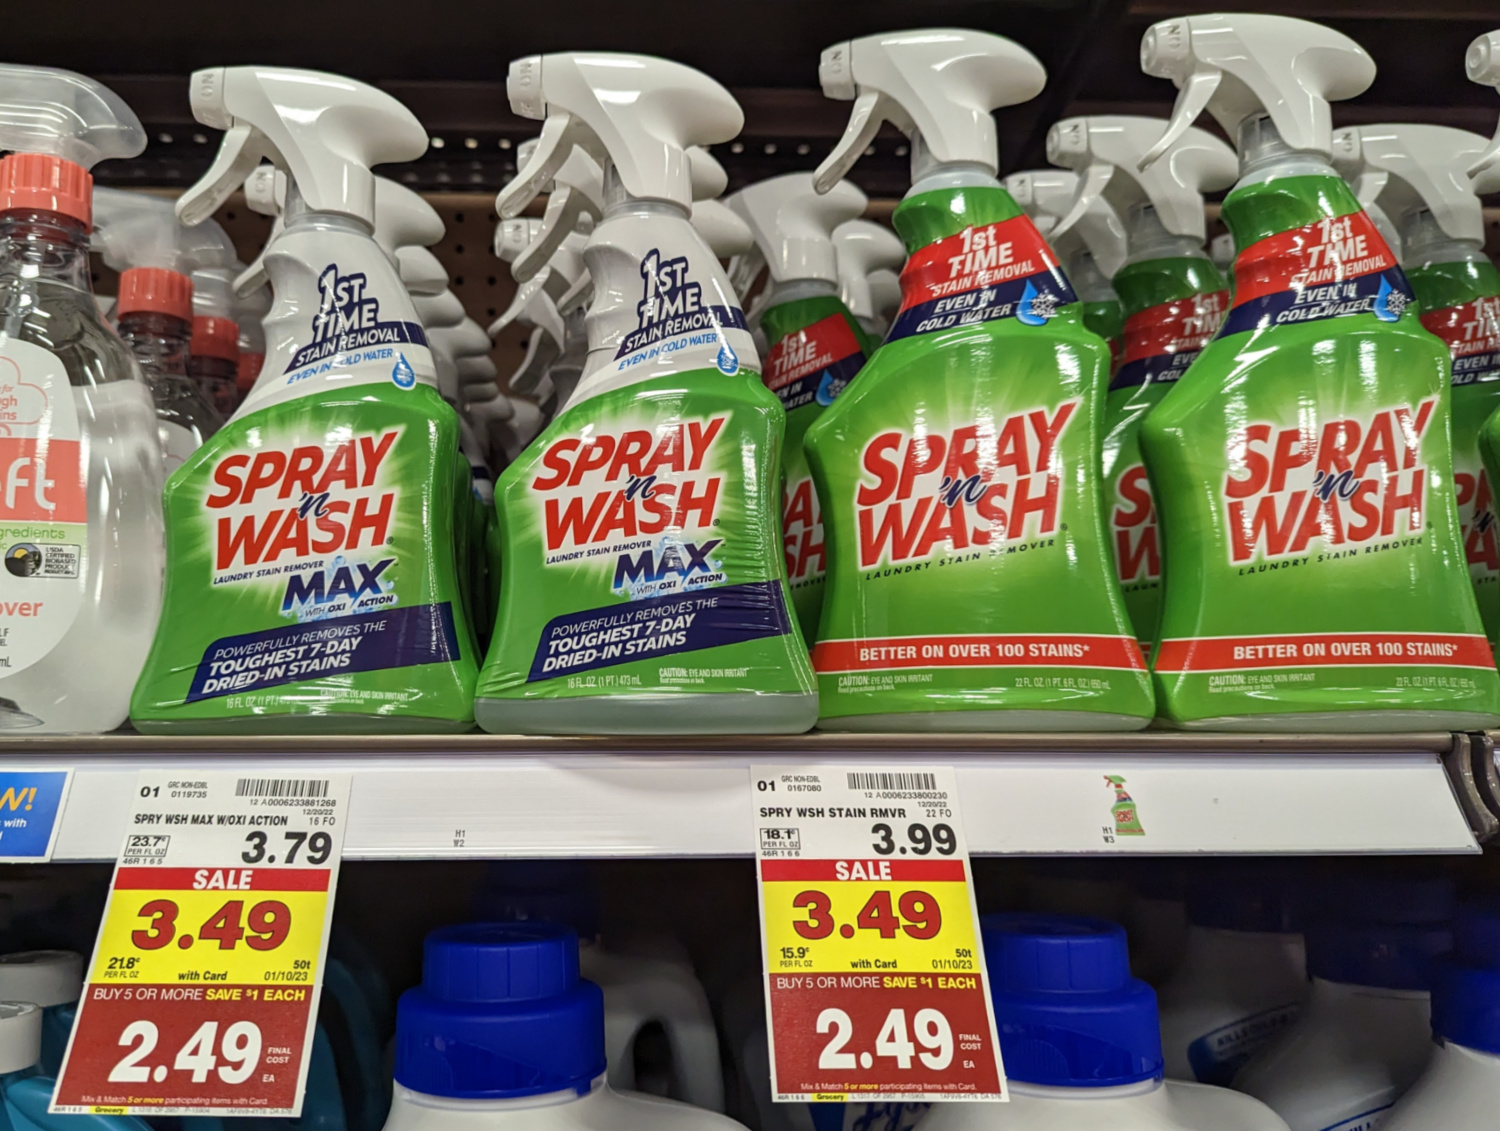 Spray 'n Wash Pre-Treat Laundry Stain Remover - Shop Stain